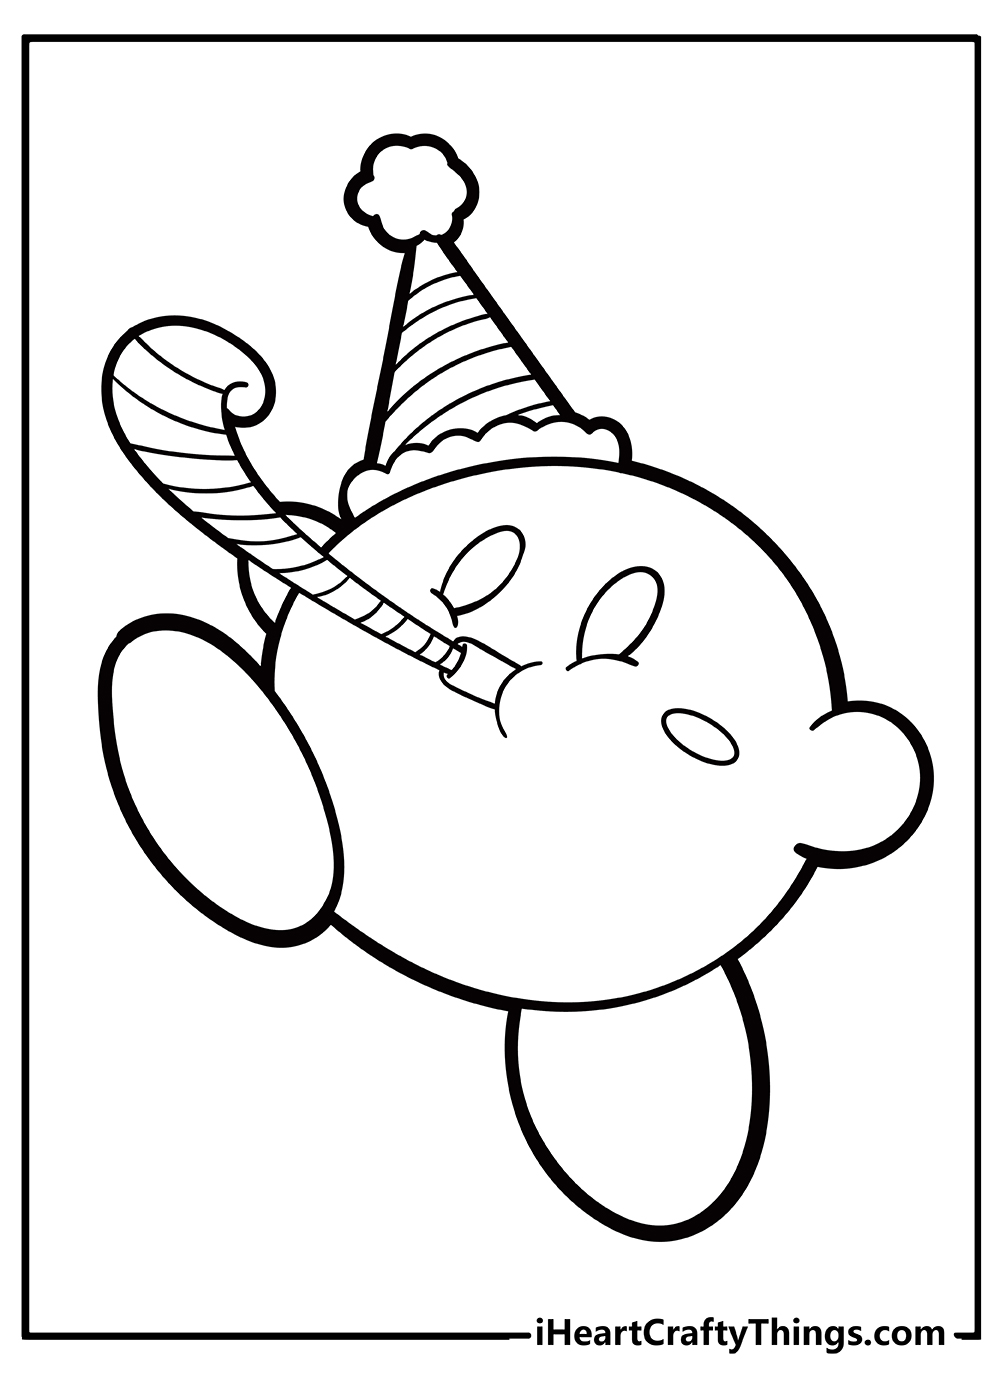 Kirby Coloring Original Sheet for children free download